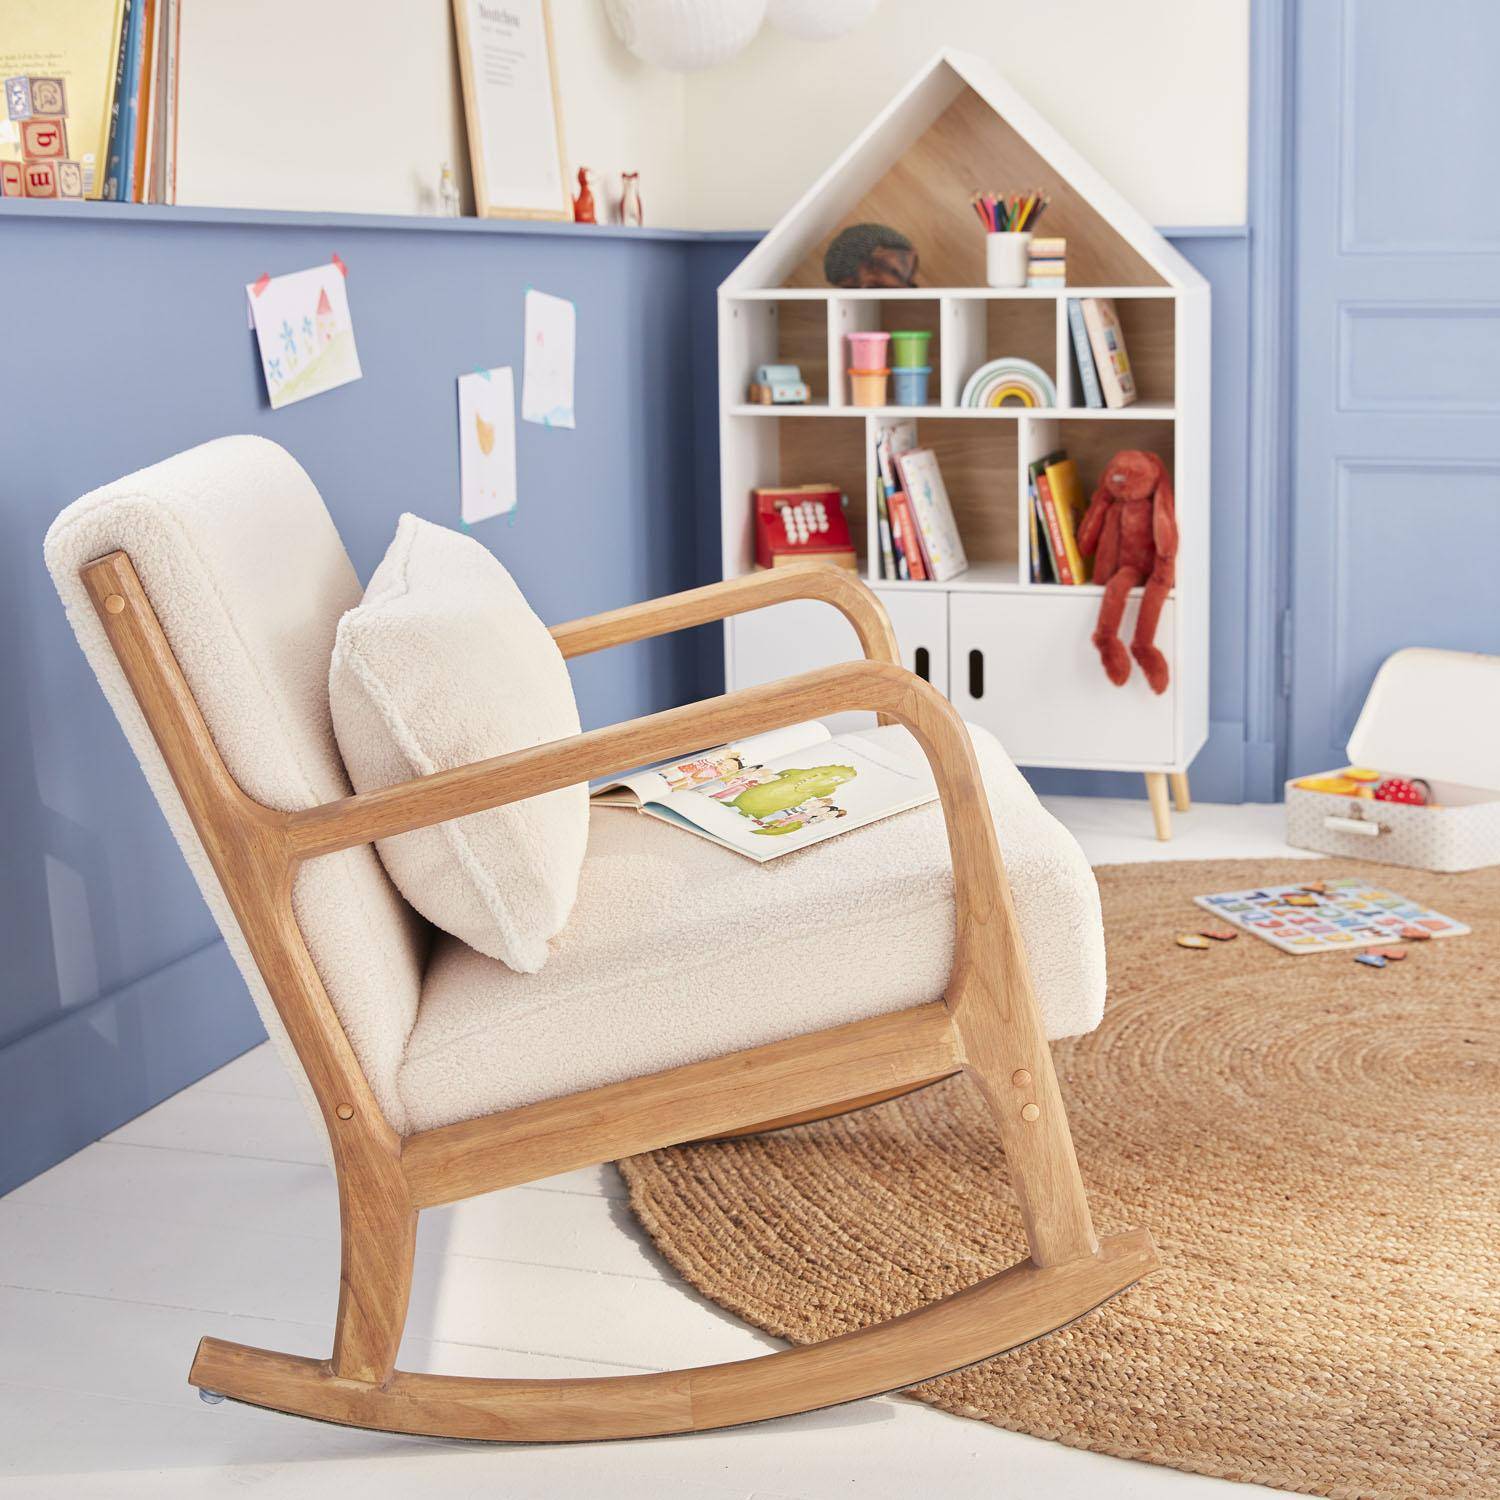 Children's house-shaped bookcase - 3 shelves, 8 compartments, 2 cupboards, Scandi-style - Tobias - Natural pine, White Photo2